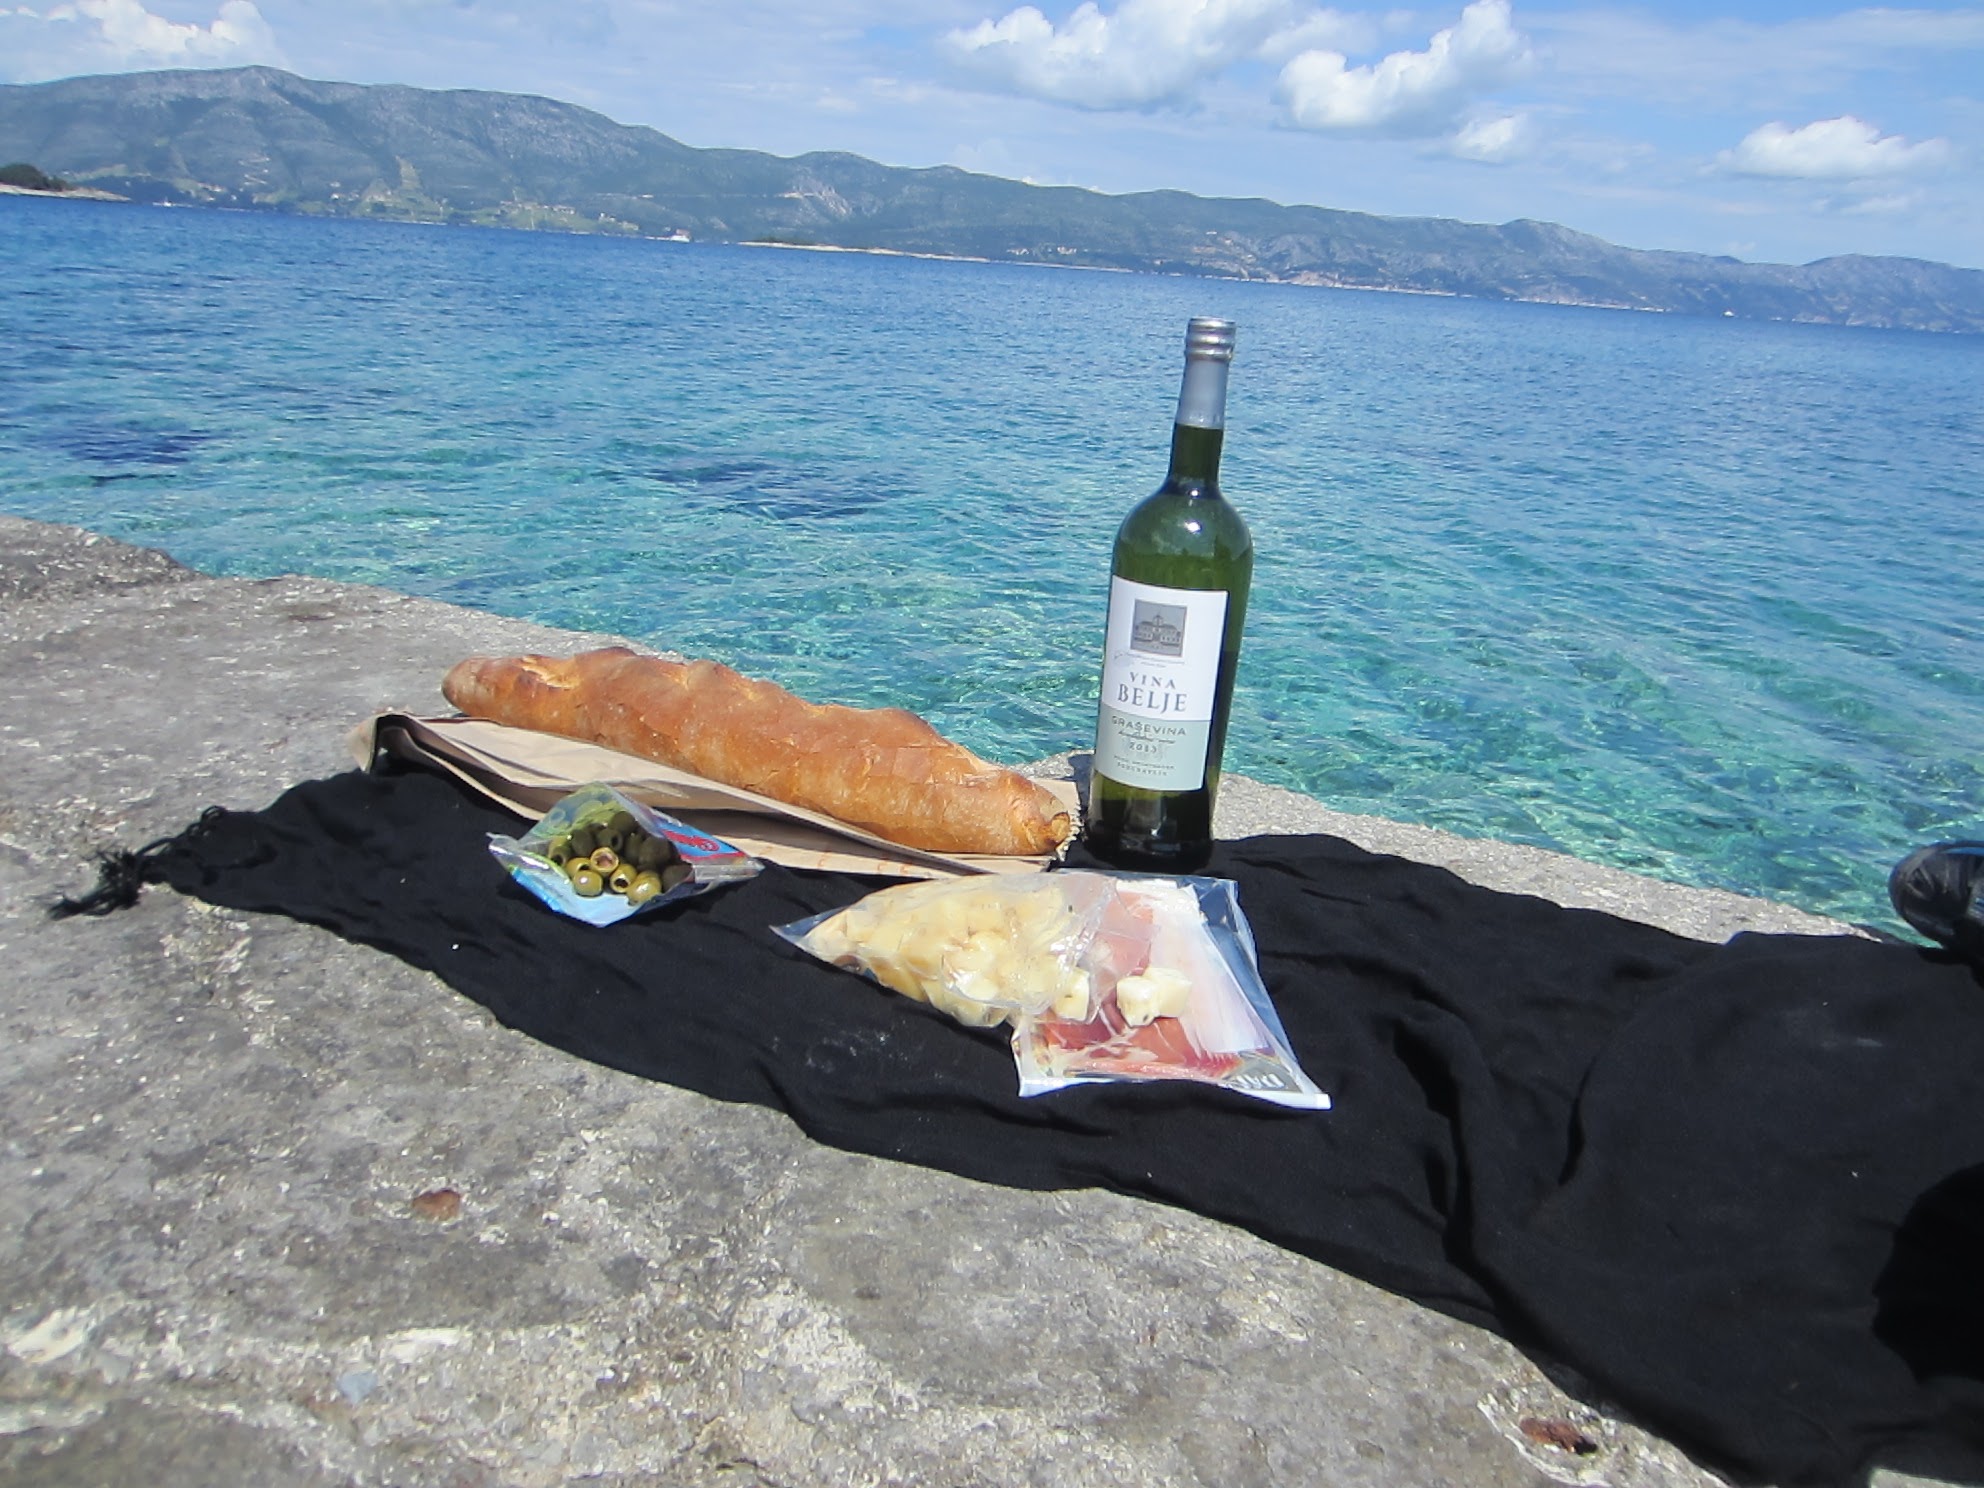 Picnic lunch of the pier at Lumbarda Beach. Despite the closure of most wineries, we still managed to get our fill of good wine.